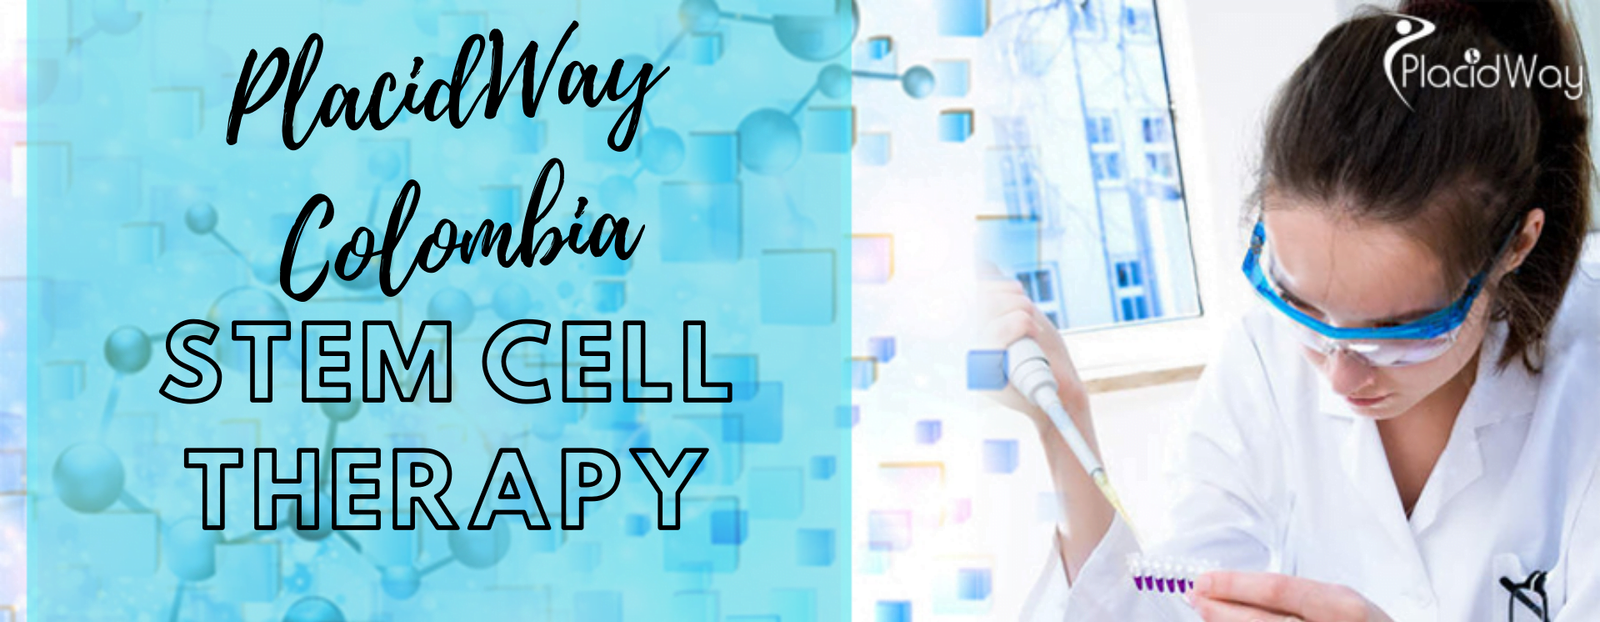 Placidway Colombia-Stem Cell Therapy